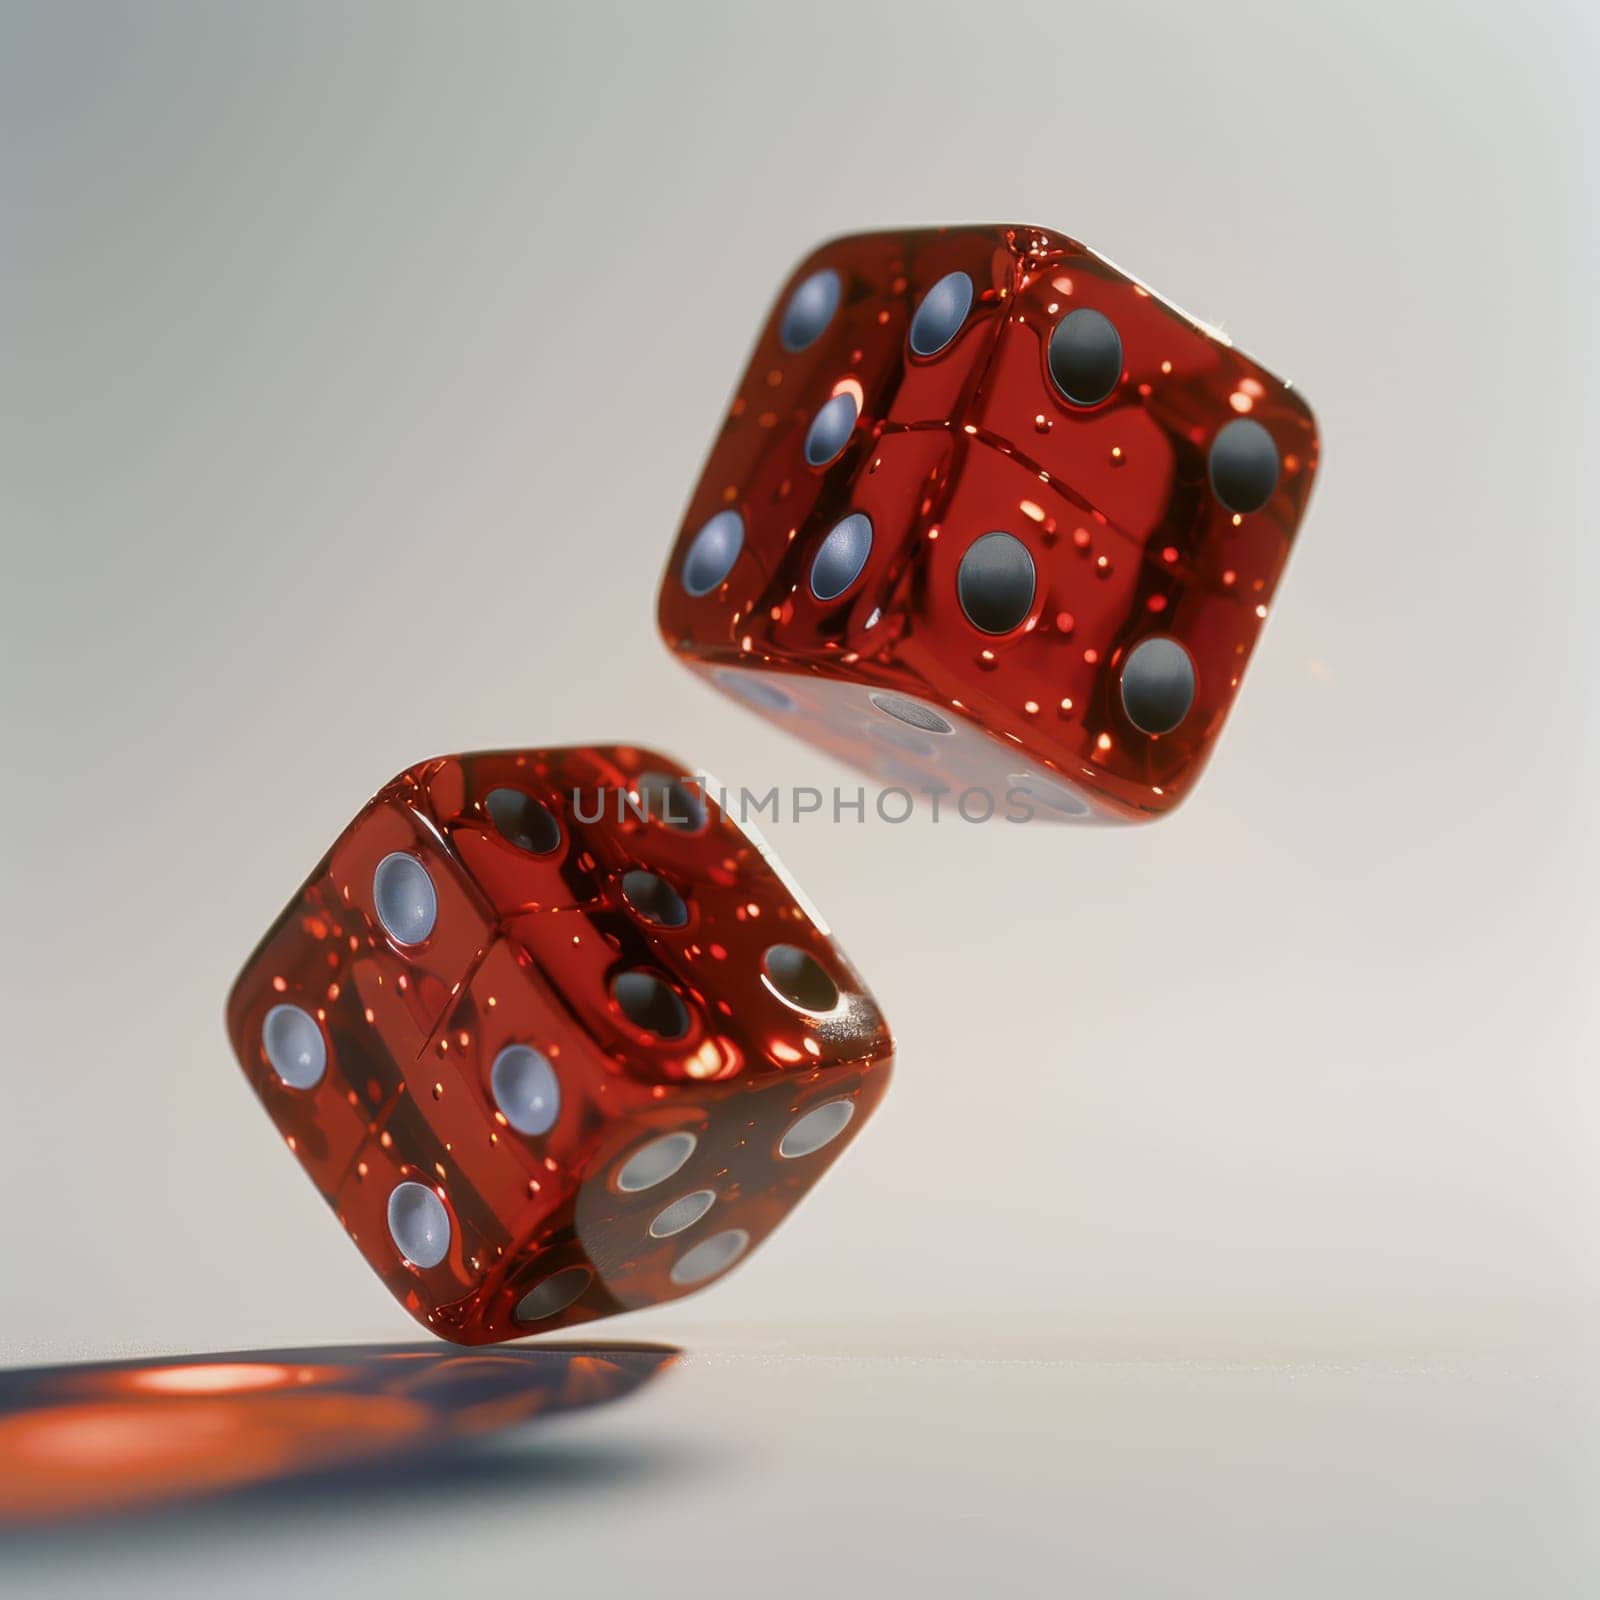 Two red dice are shown in midair, one on top of the other. Concept of excitement and anticipation, as if the dice are about to be rolled in a game of chance